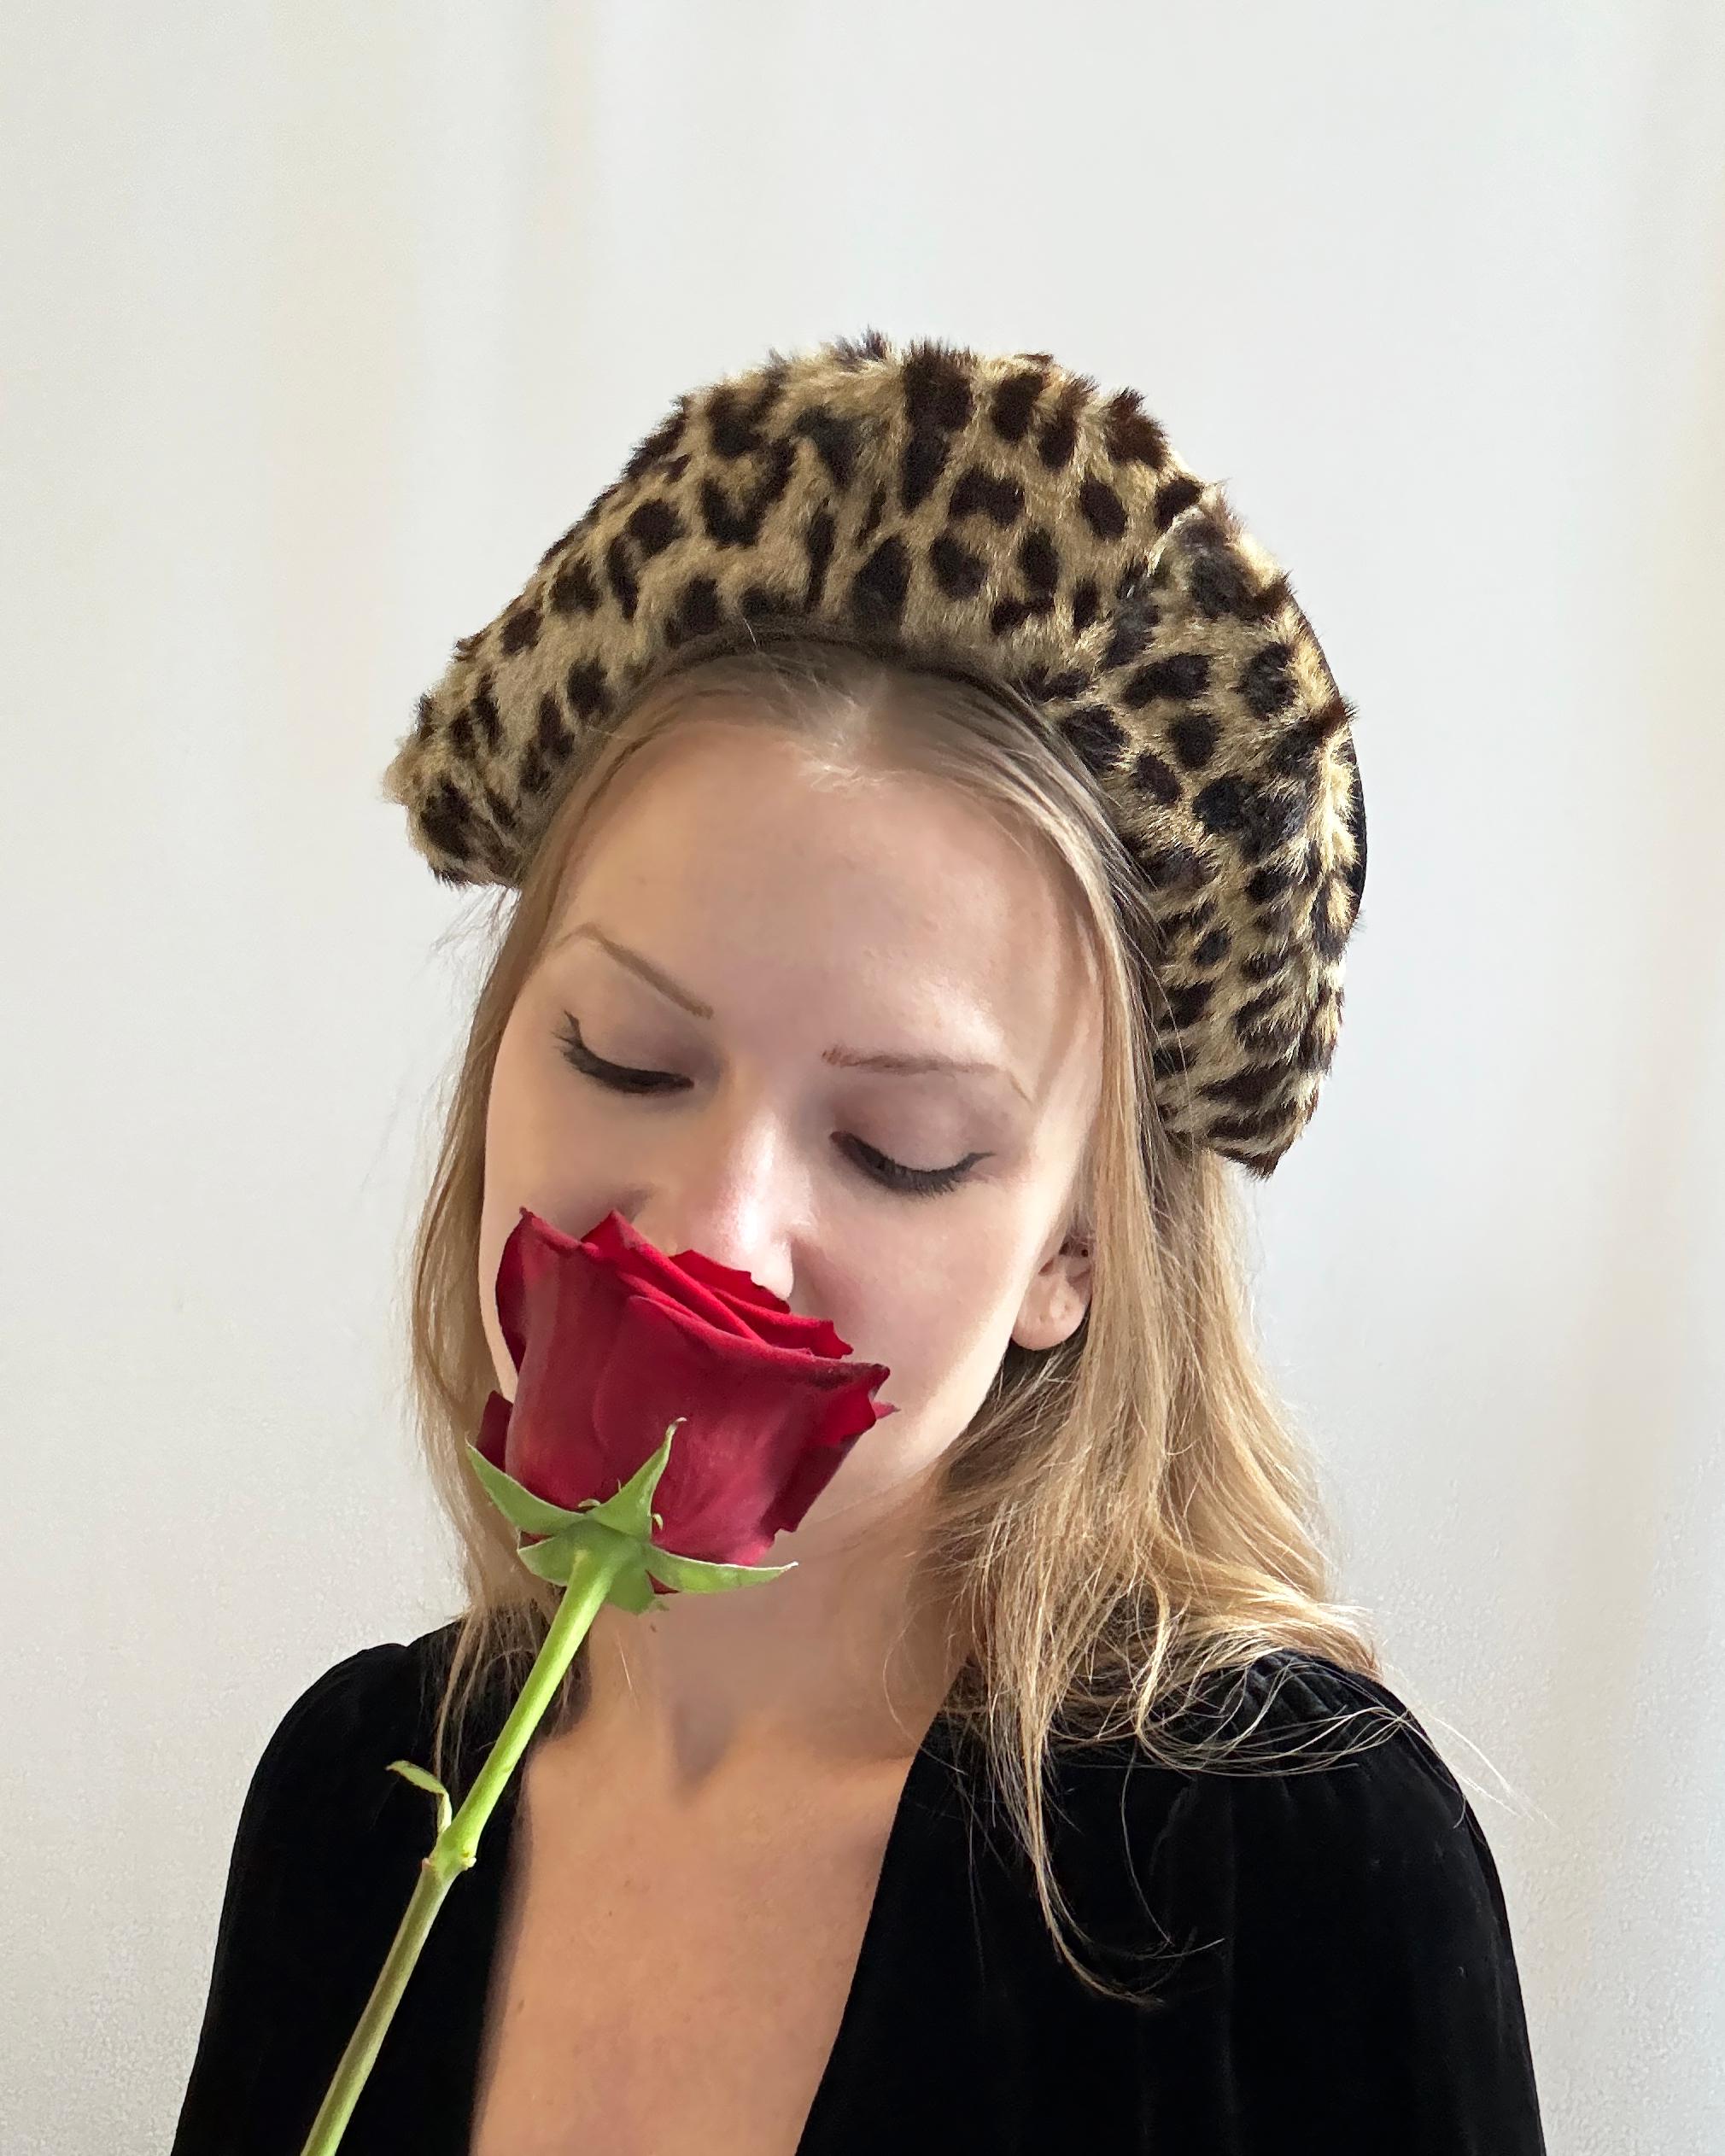 This 1950s bandeau headband hat/fascinator is rendered in a lush leopard print faux-fur. Crafted by hand and likely one-of-a-kind, its façade is angled backward and grows in height towards the crown of the head, creating an extremely face-flattering